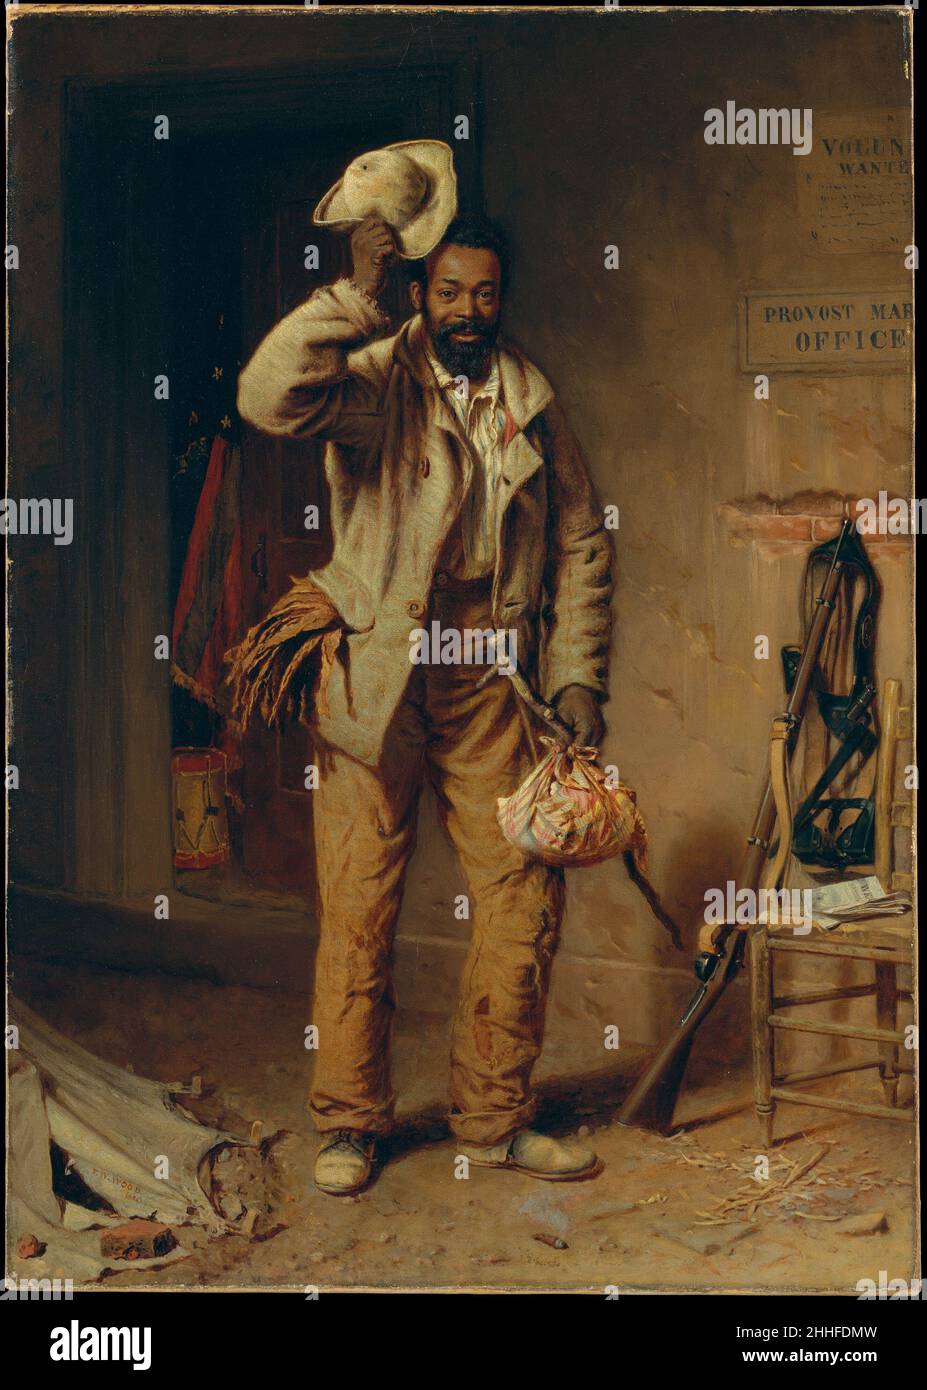 A Bit of War History: The Contraband 1865 Thomas Waterman Wood American This work, painted at the close of the Civil War, forms a narrative triptych (84.12a, b, c) of African American military service. In 'The Contraband' (84.12a)—a term that referred to enslaved people who fled to Union lines at the beginning of the conflict—the self-emancipated man appears in a U.S. Army Provost Marshall General office, eager to enlist. The Recruit (84.12b) represents him as proudly ready for military service. In 'The Veteran' (84.12c), he is depicted as an amputee possibly seeking his pension in the same of Stock Photo